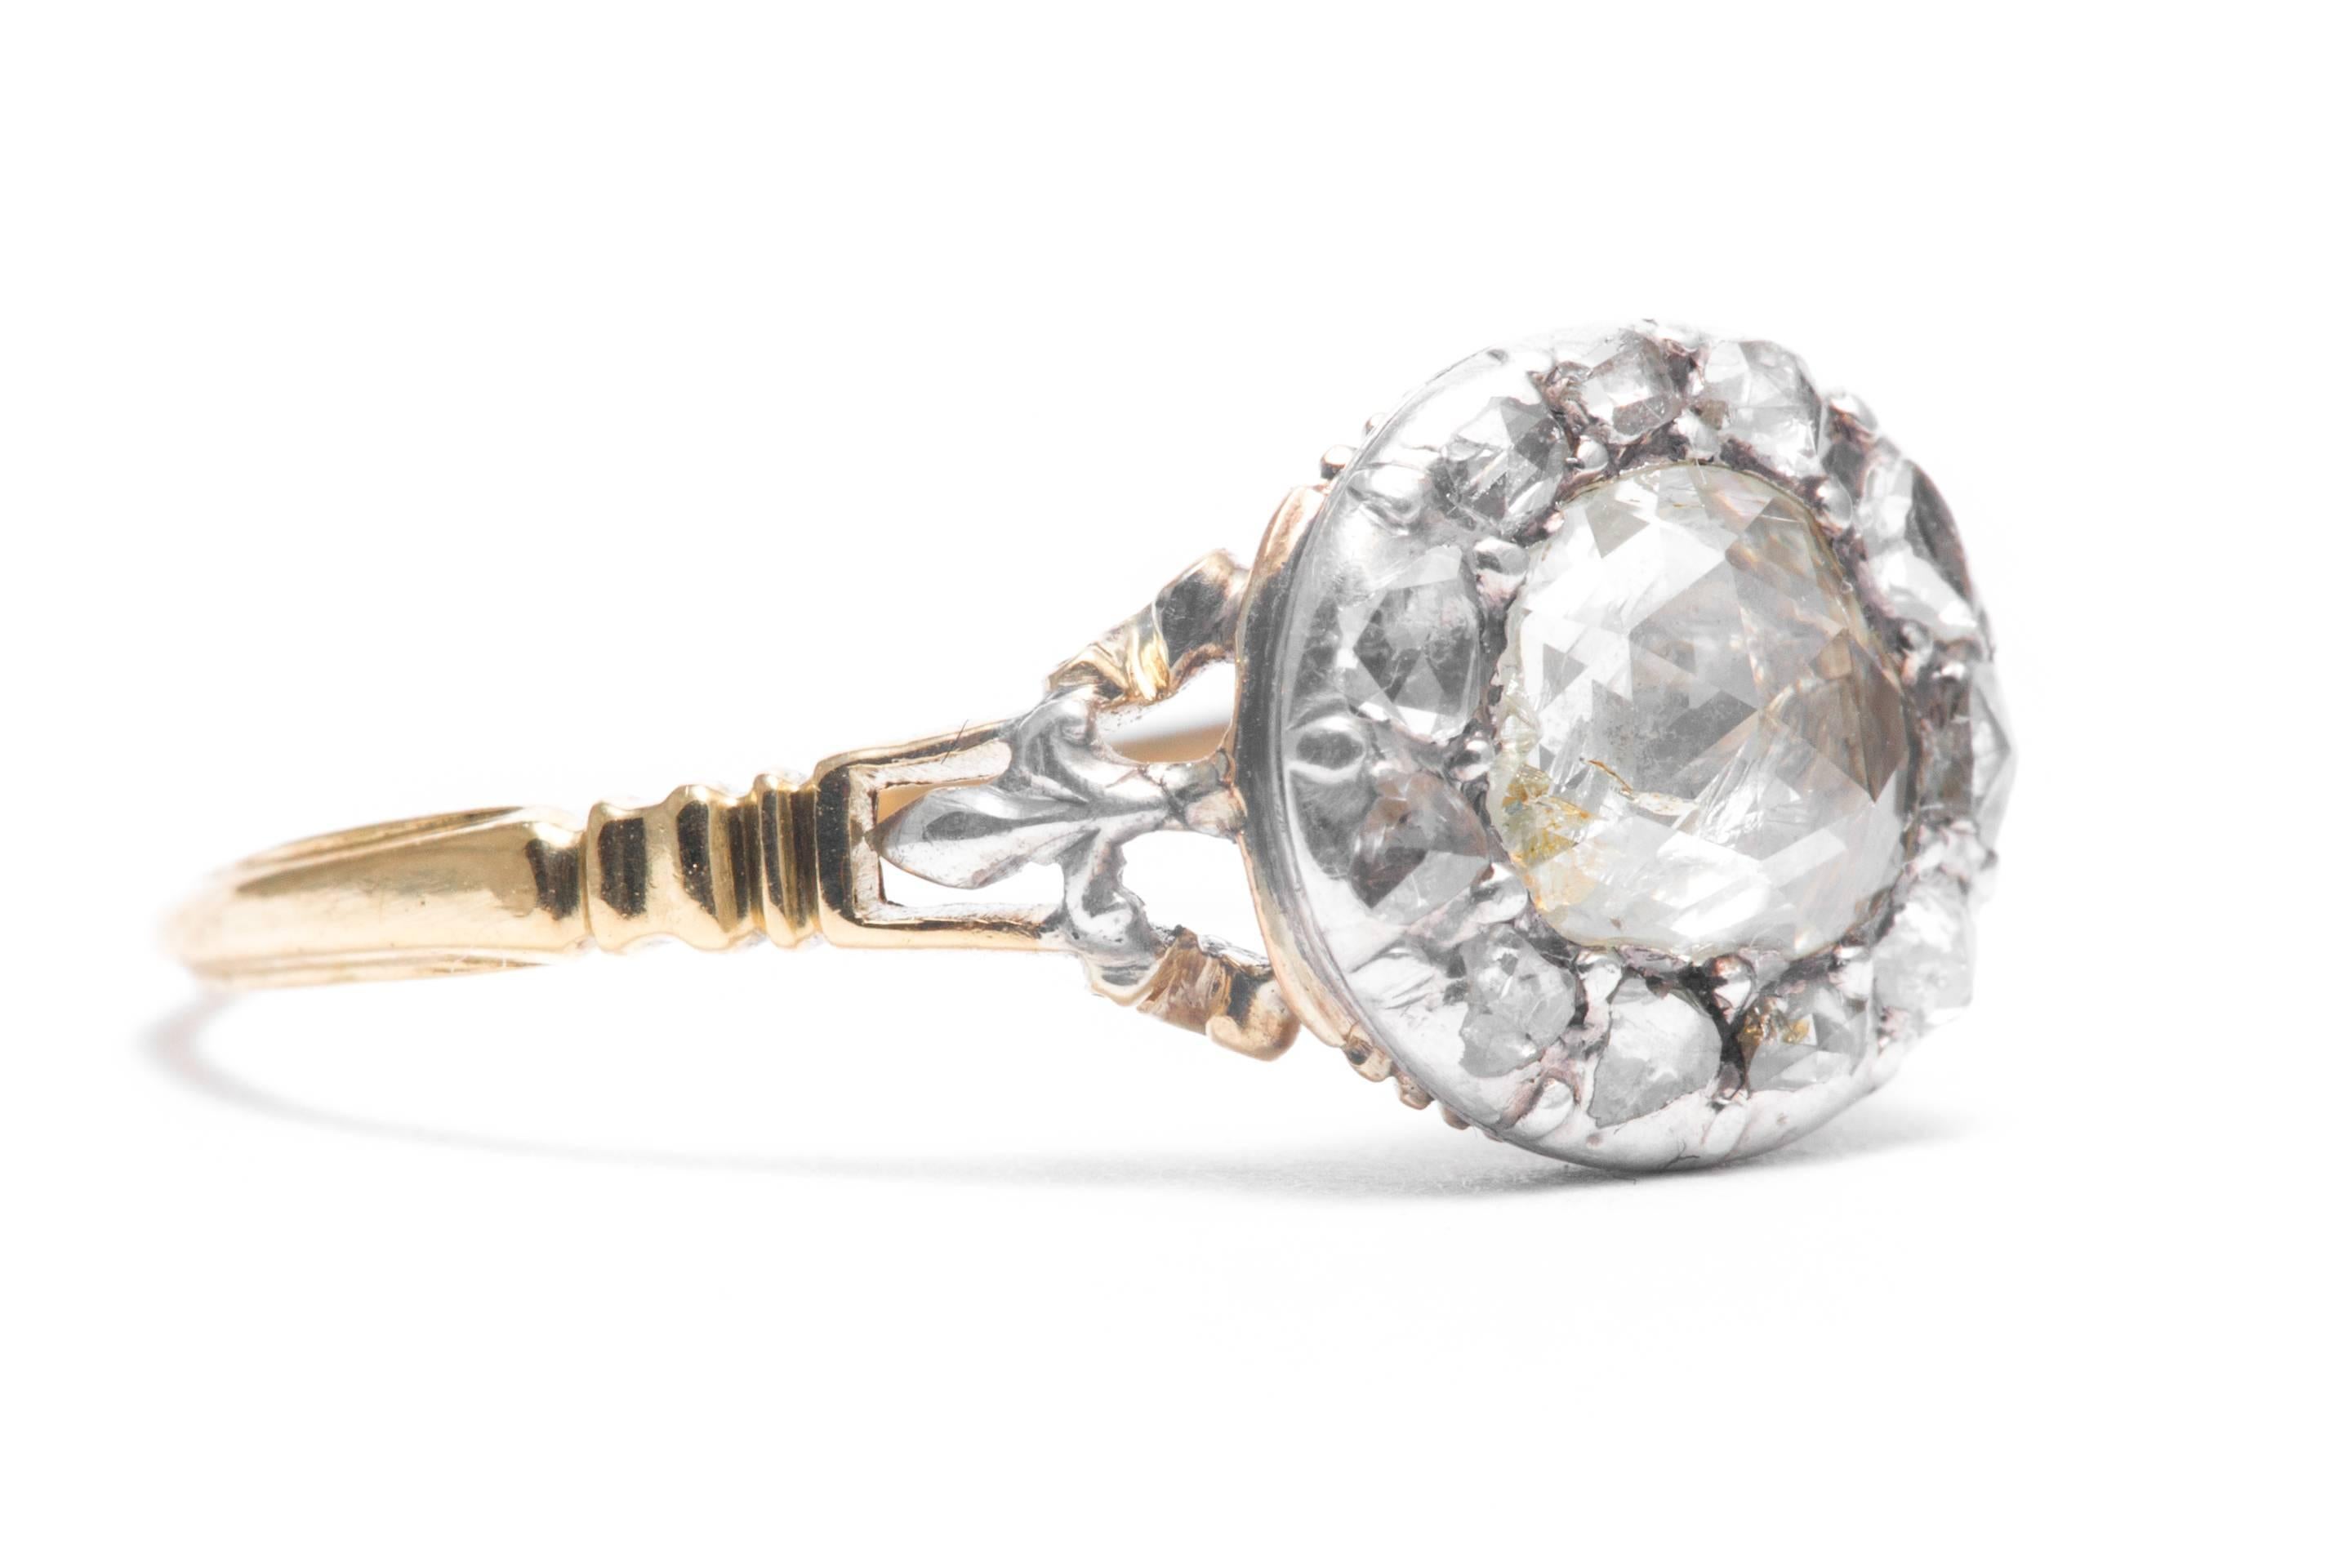 An original 18th century period Georgian, rose cut diamond engagement ring in 18 karat yellow gold and silver.  In remarkable and original condition, this ring features a central rose cut diamond framed by smaller rose cut diamonds set in silver